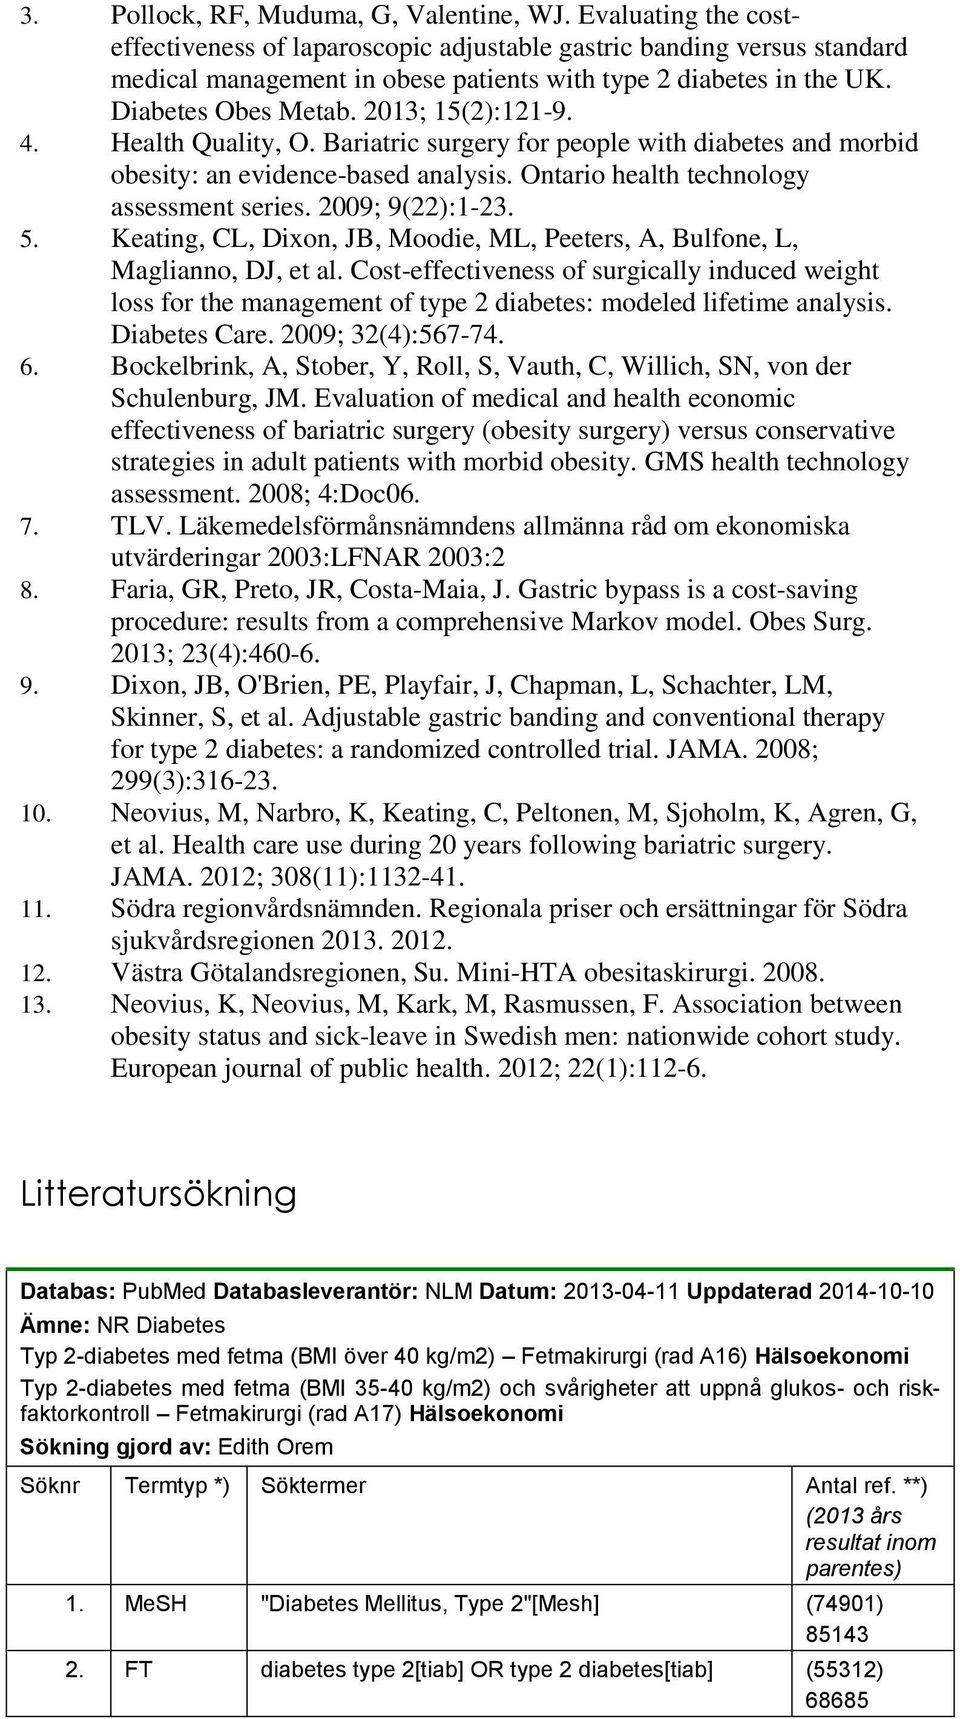 4. Health Quality, O. Bariatric surgery for people with diabetes and morbid obesity: an evidence-based analysis. Ontario health technology assessment series. 2009; 9(22):1-23. 5.